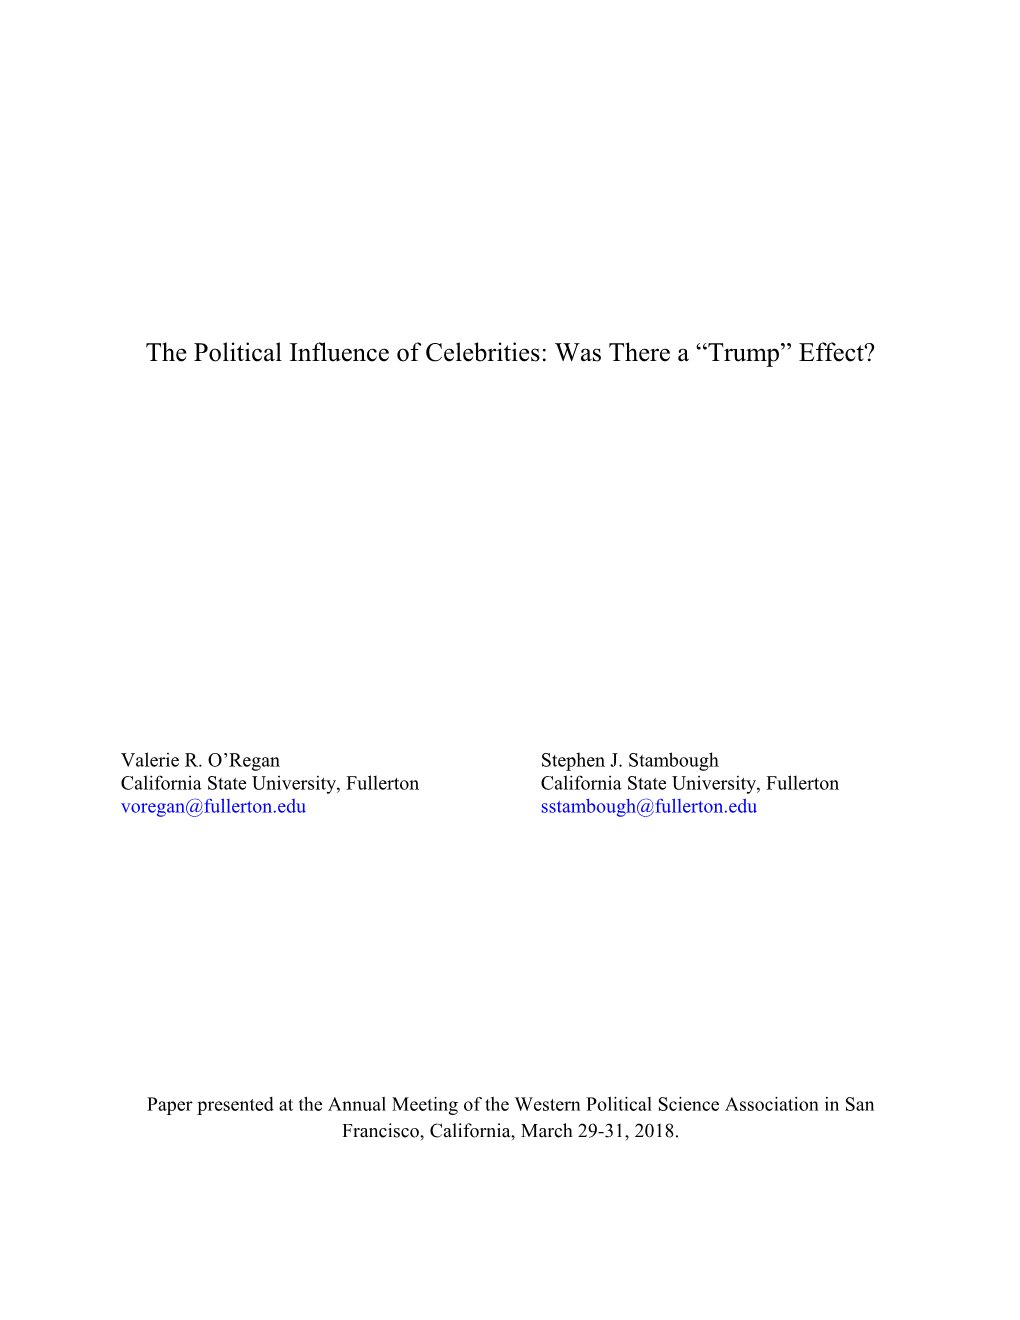 The Political Influence of Celebrities: Was There a Trump Effect?